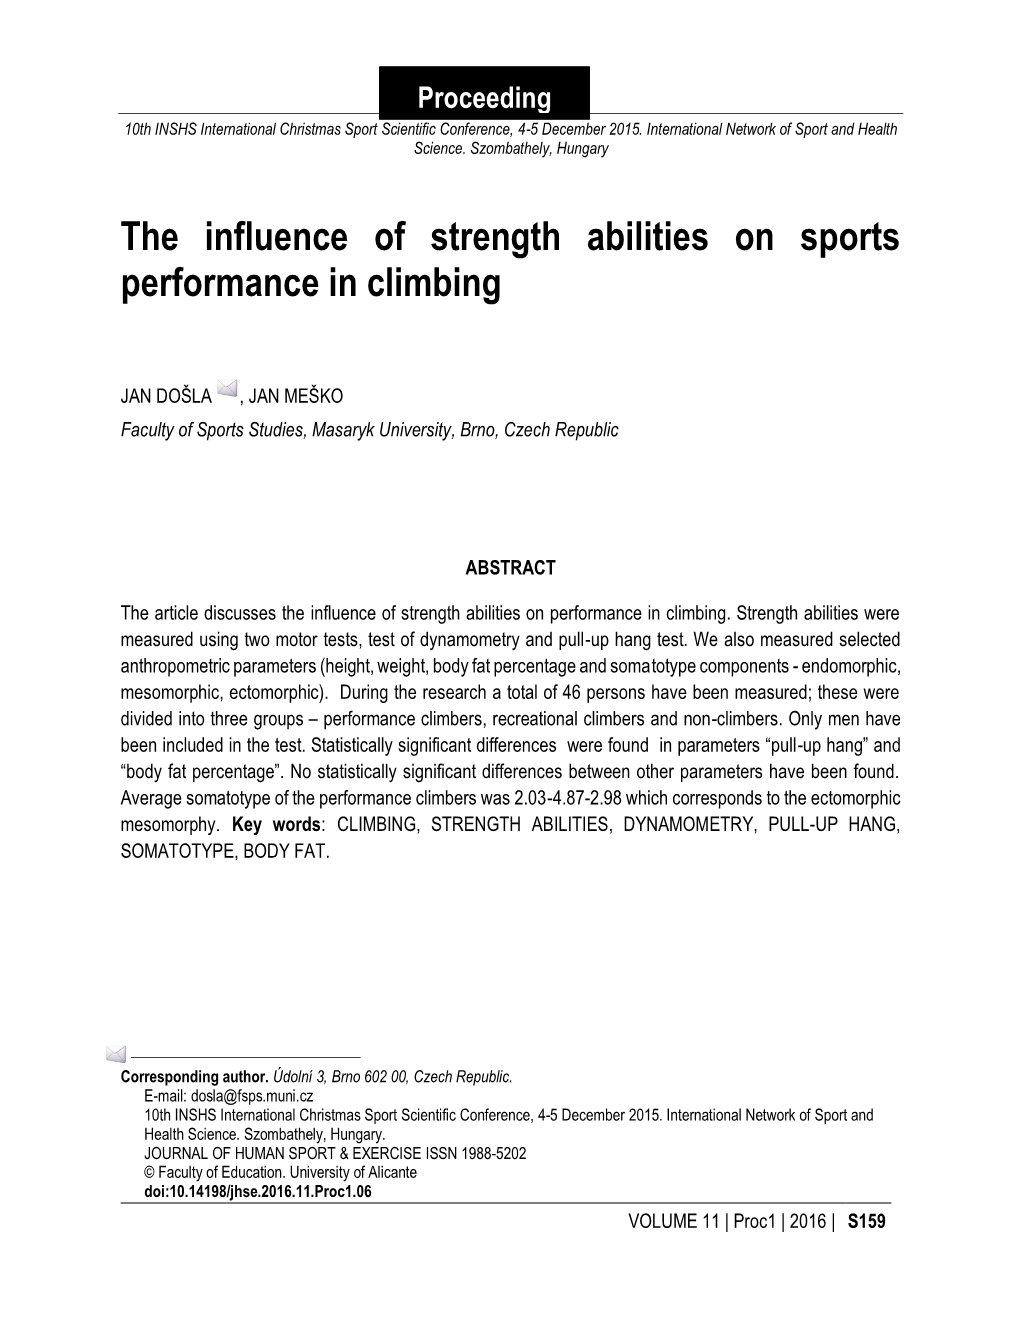 The Influence of Strength Abilities on Sports Performance in Climbing